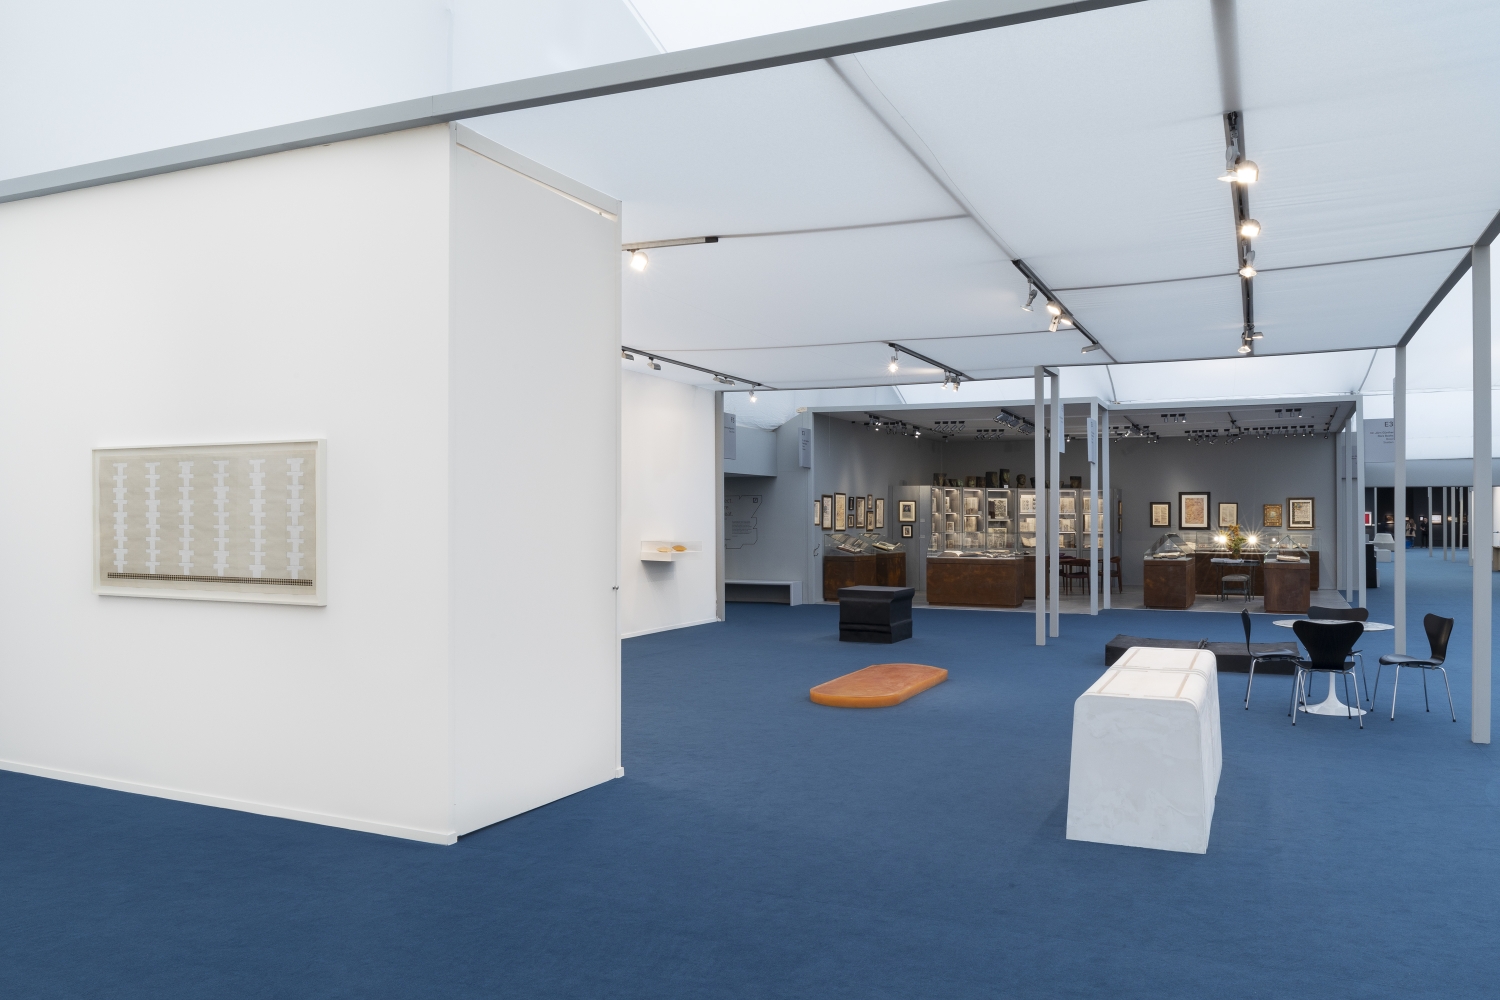 Luhring Augustine, Frieze Masters, Stand F05